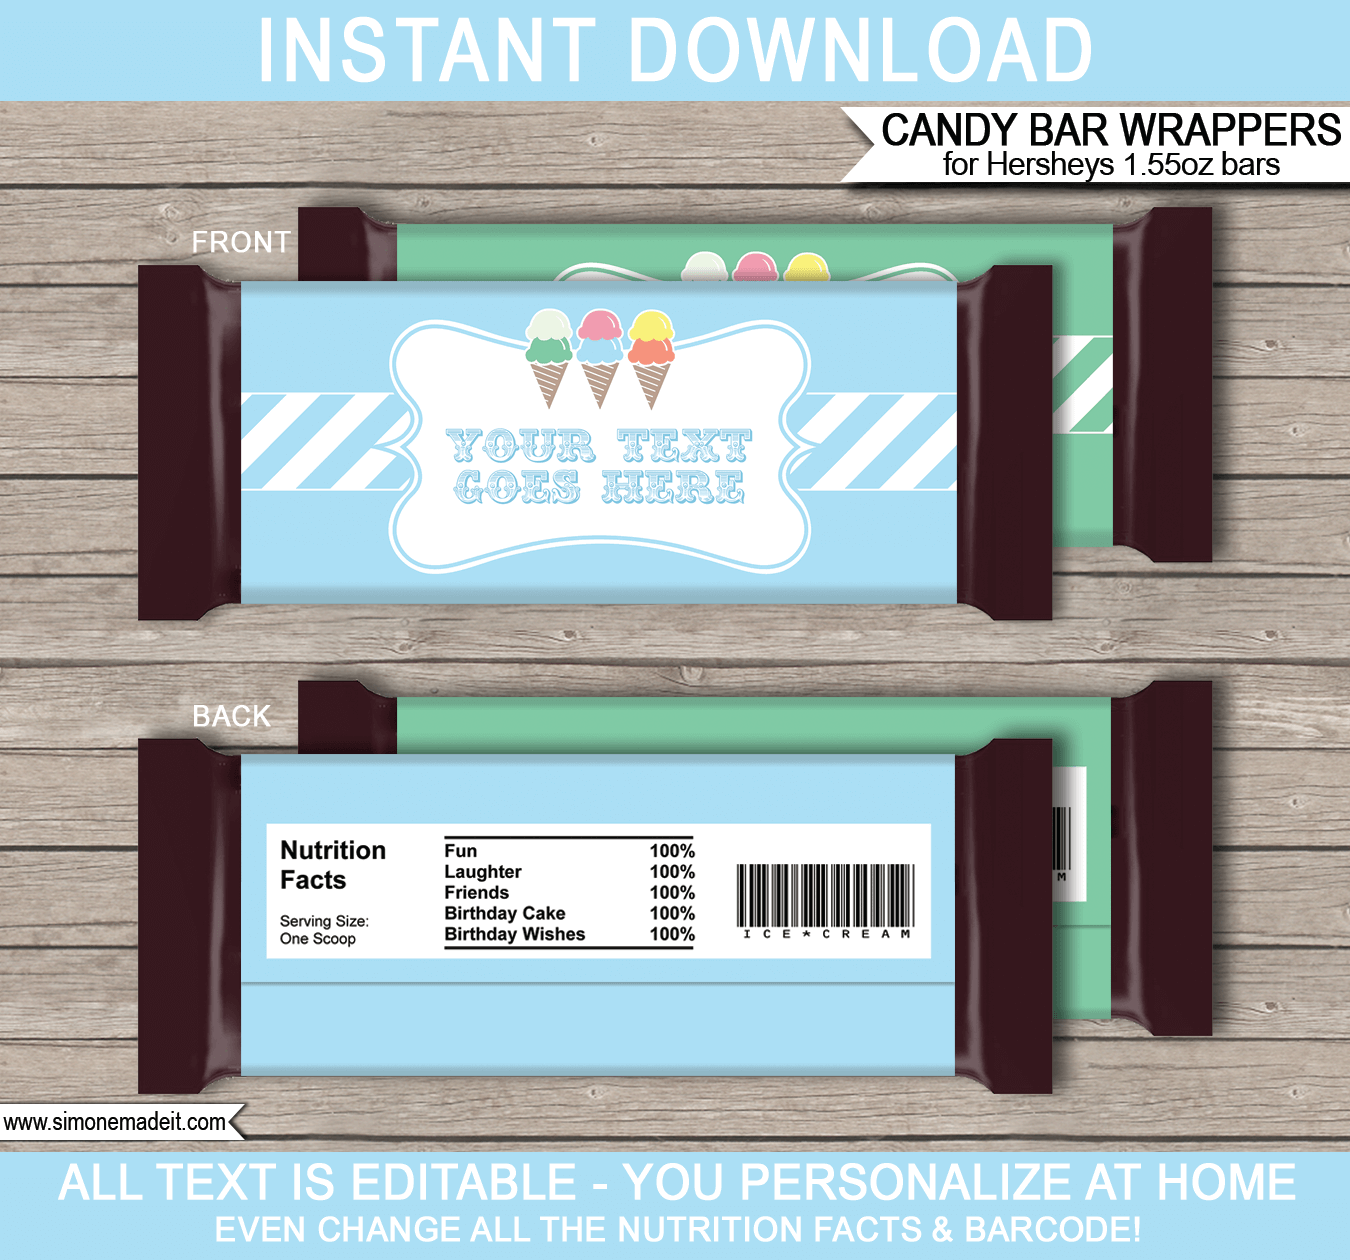 Ice Cream Party Hershey Candy Bar Wrappers | Birthday Party Favors | Personalized Candy Bars | Editable Template | INSTANT DOWNLOAD $3.00 via simonemadeit.com